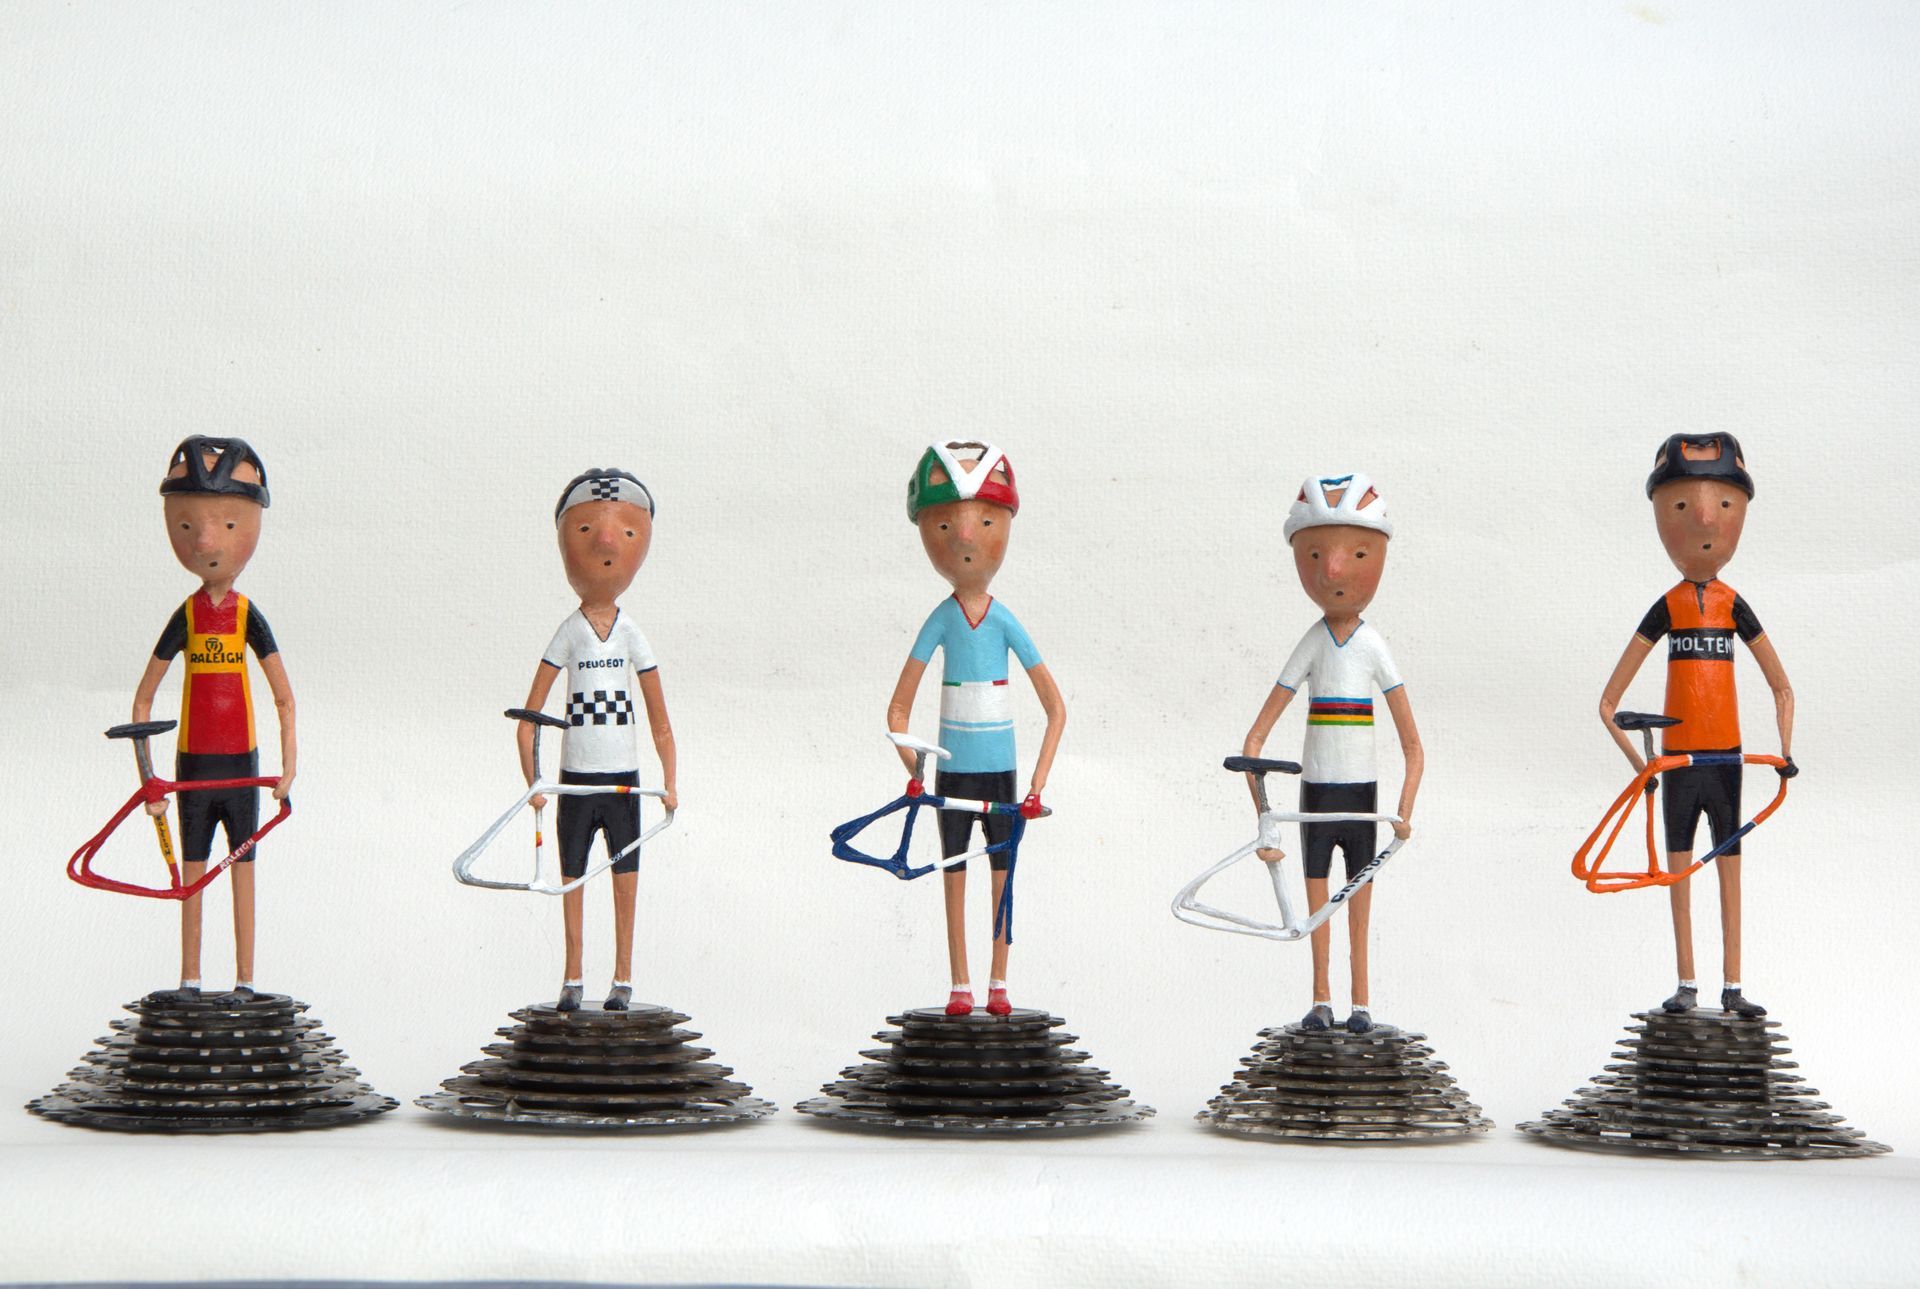 Collection of retro cyclists